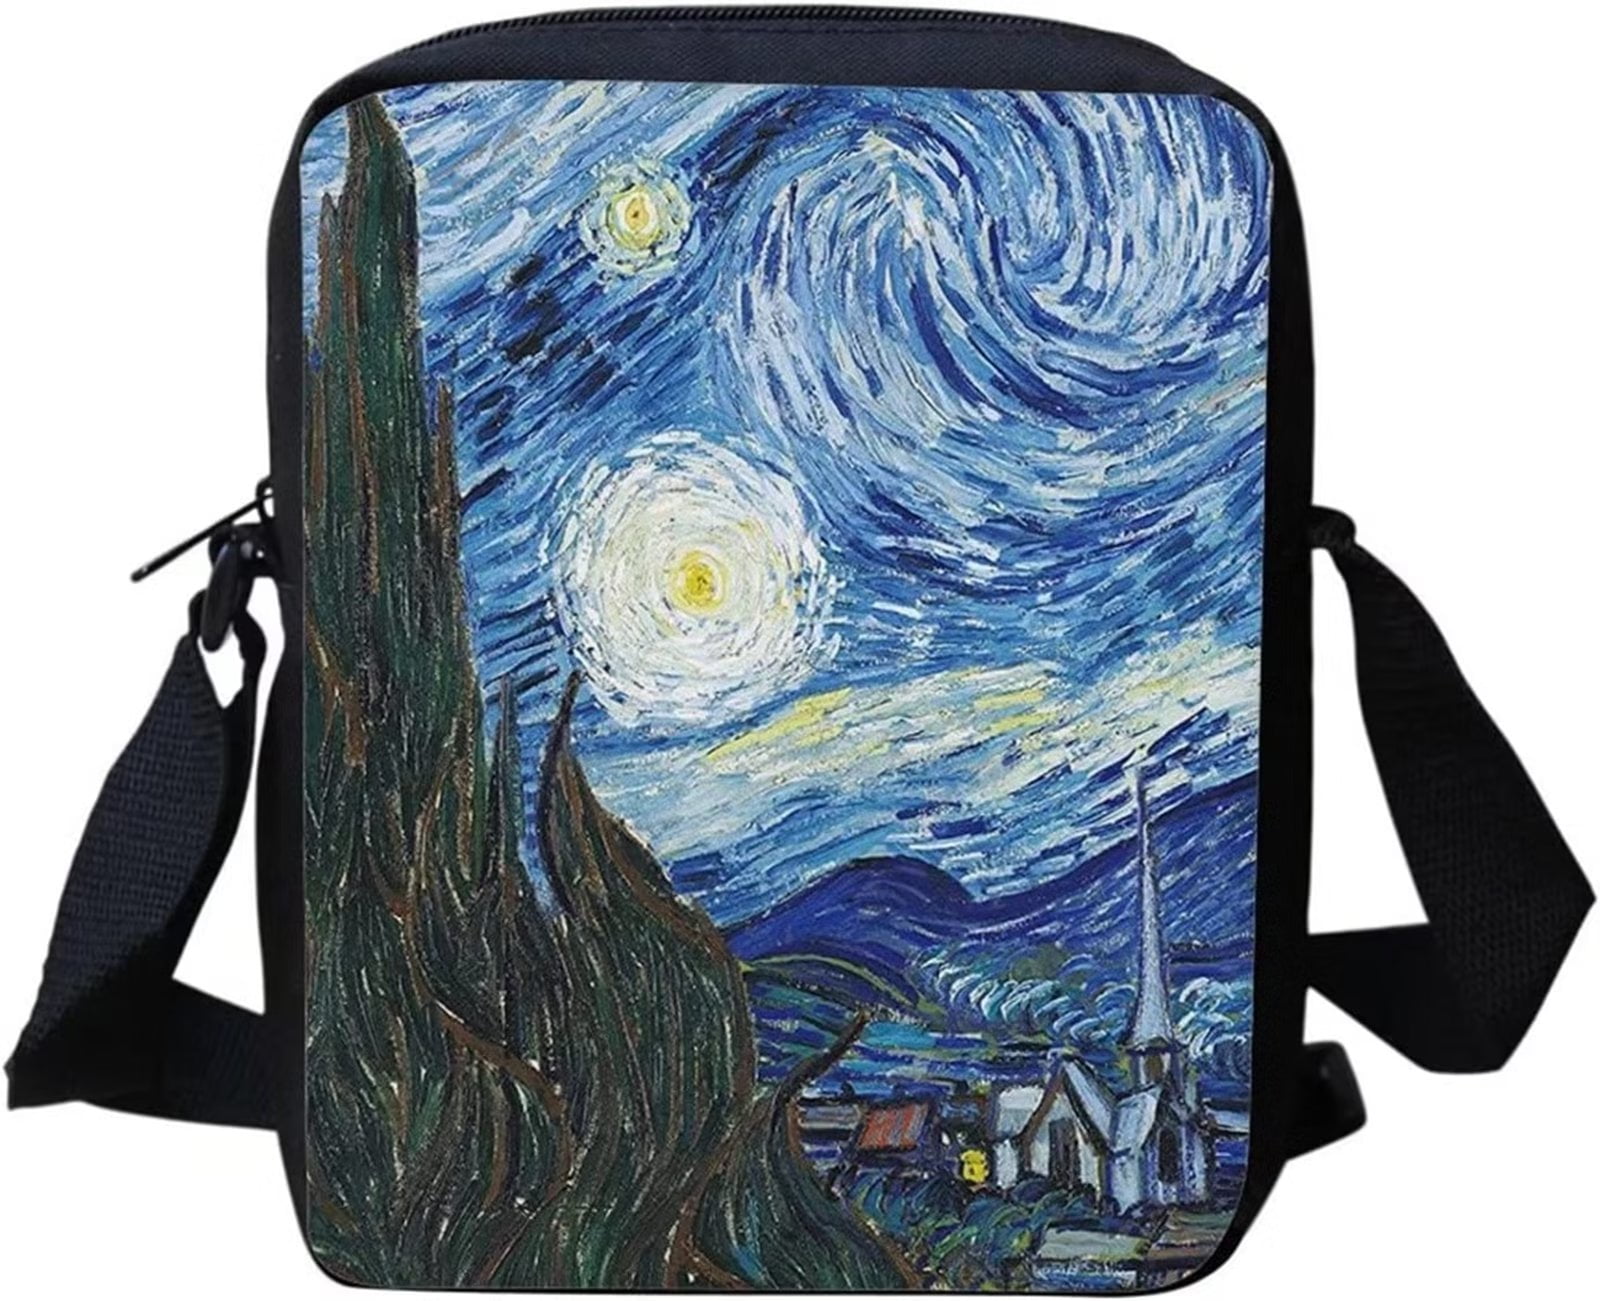 The Starry night by Vincent Van Gogh